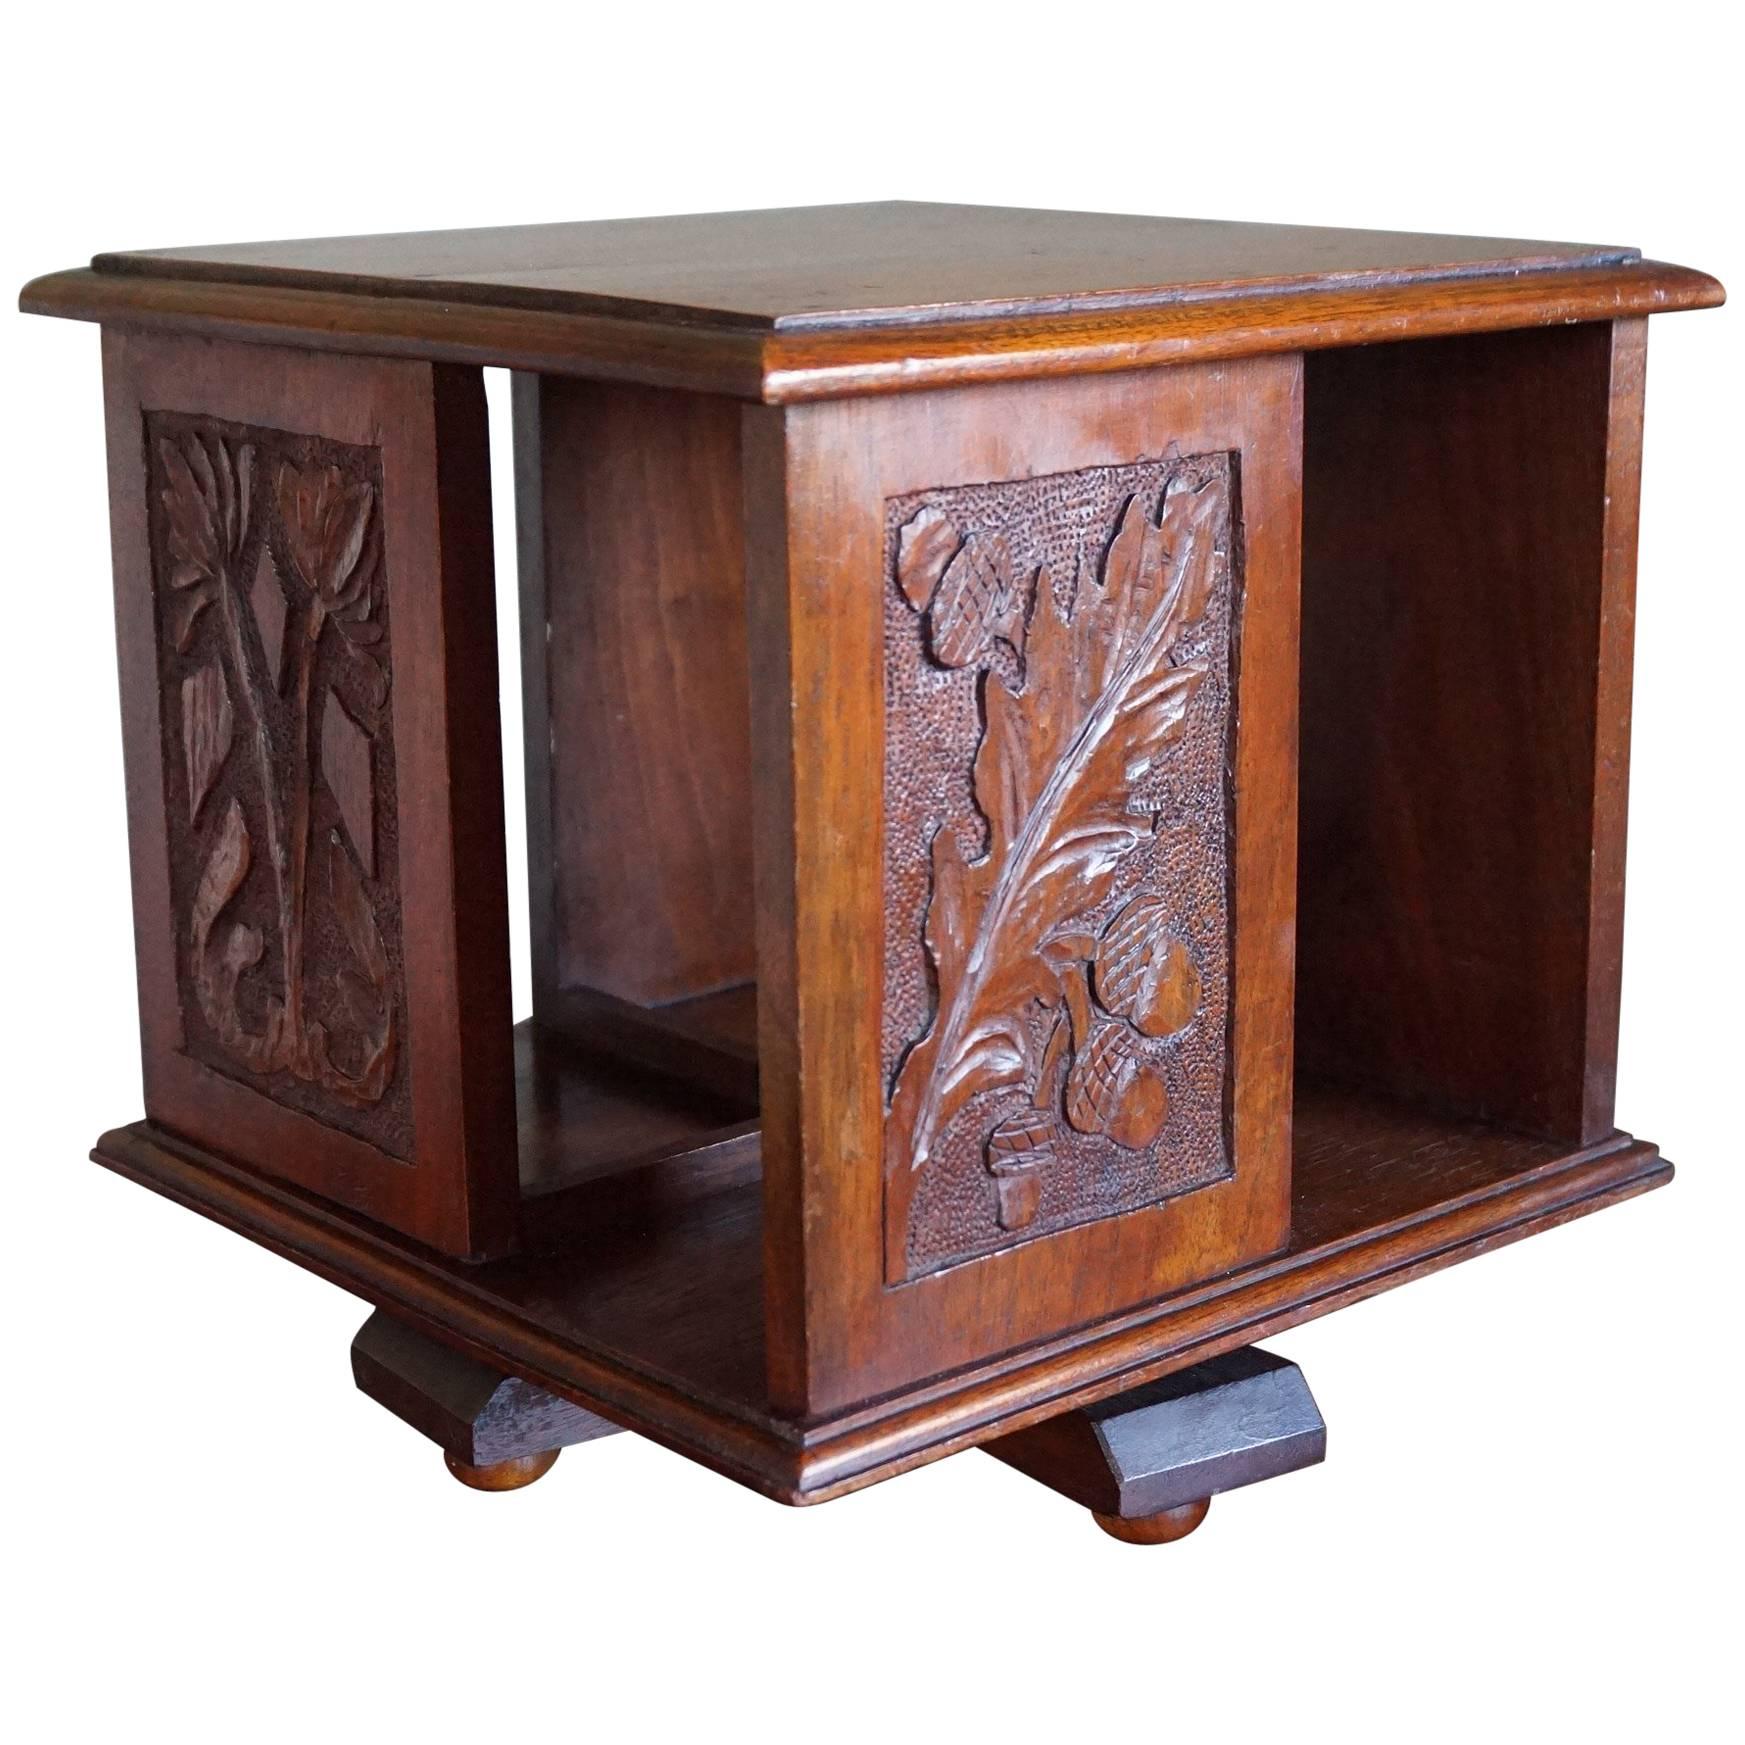 Hand-Carved Arts and Crafts Revolving Bookcase for Placing on a Table or Desk